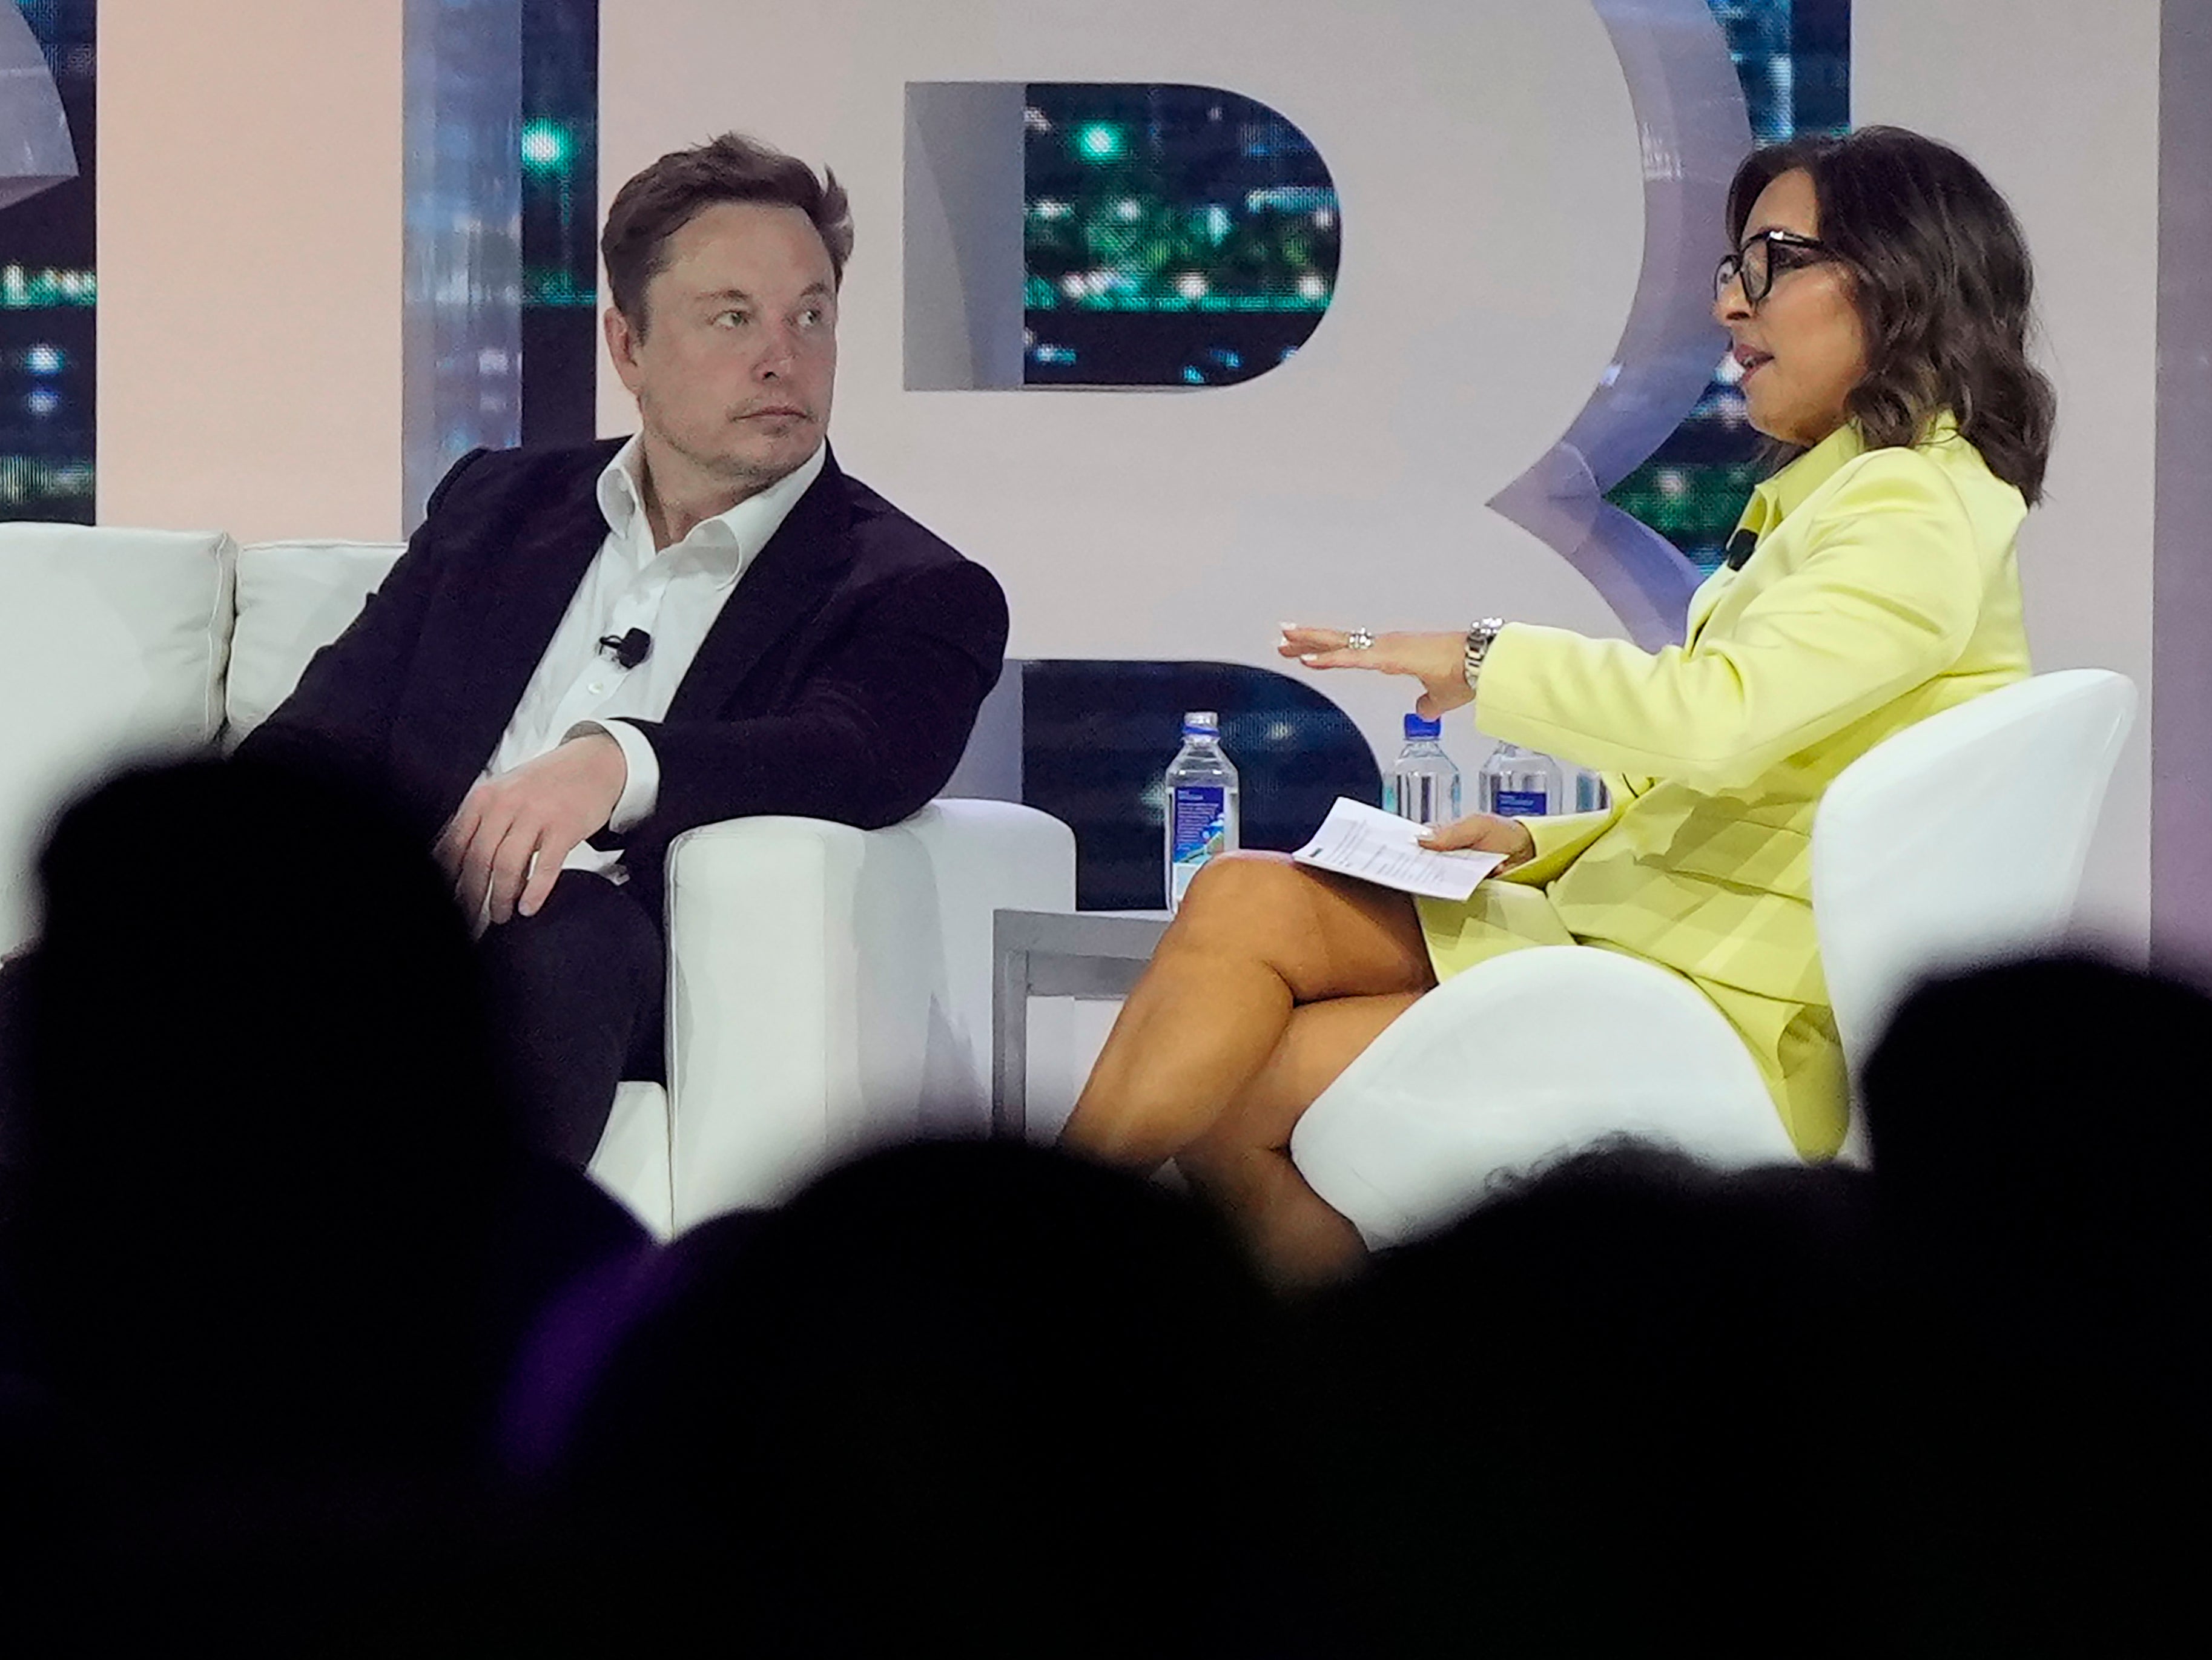 Linda Yaccarino, right, chats with Elon Musk at a conference two months before joining X